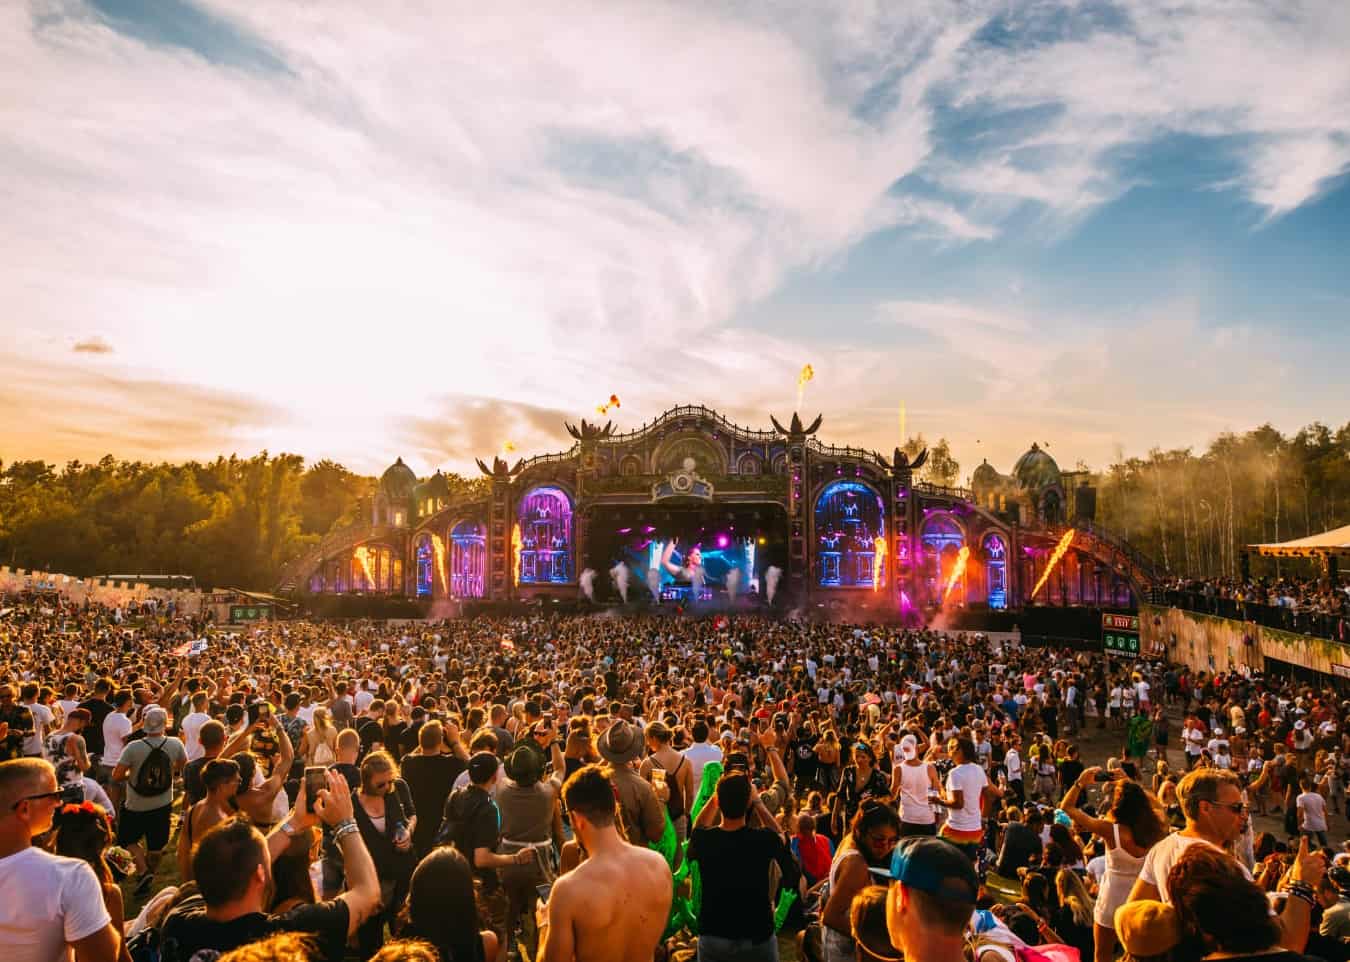 Tomorrowland and FTX have teamed up to create new digital experiences and NFTs